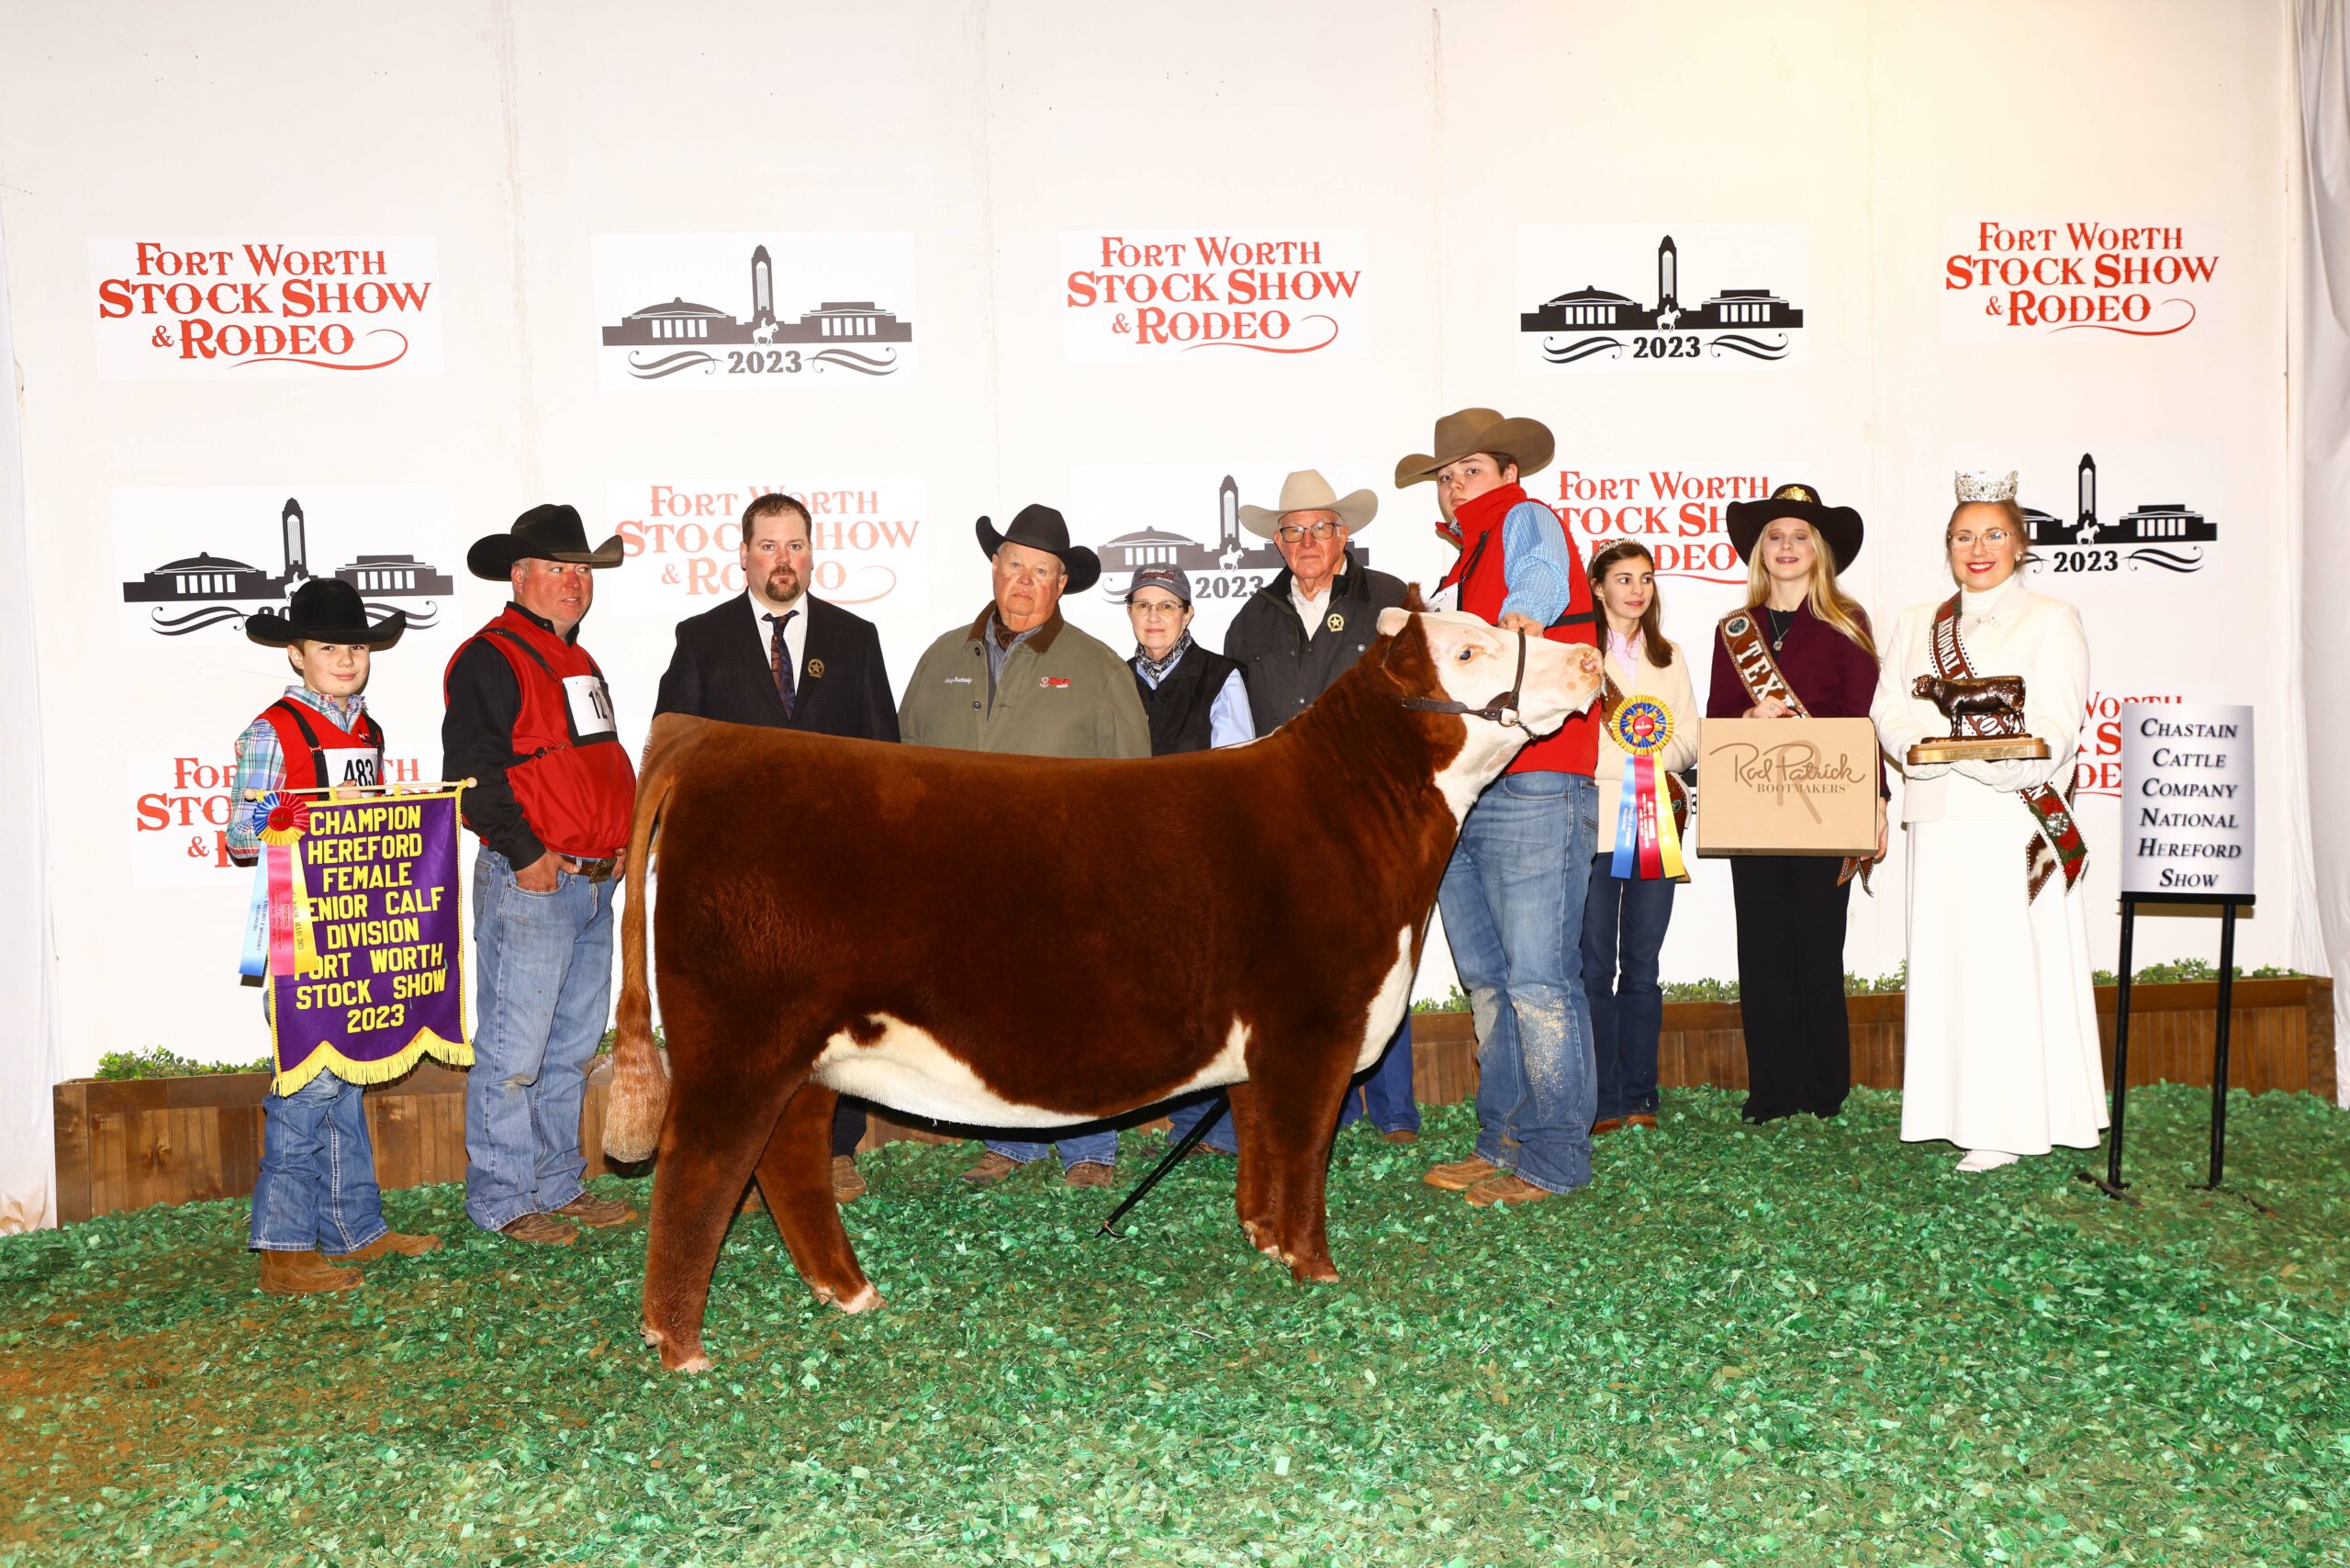 American Hereford FWSS